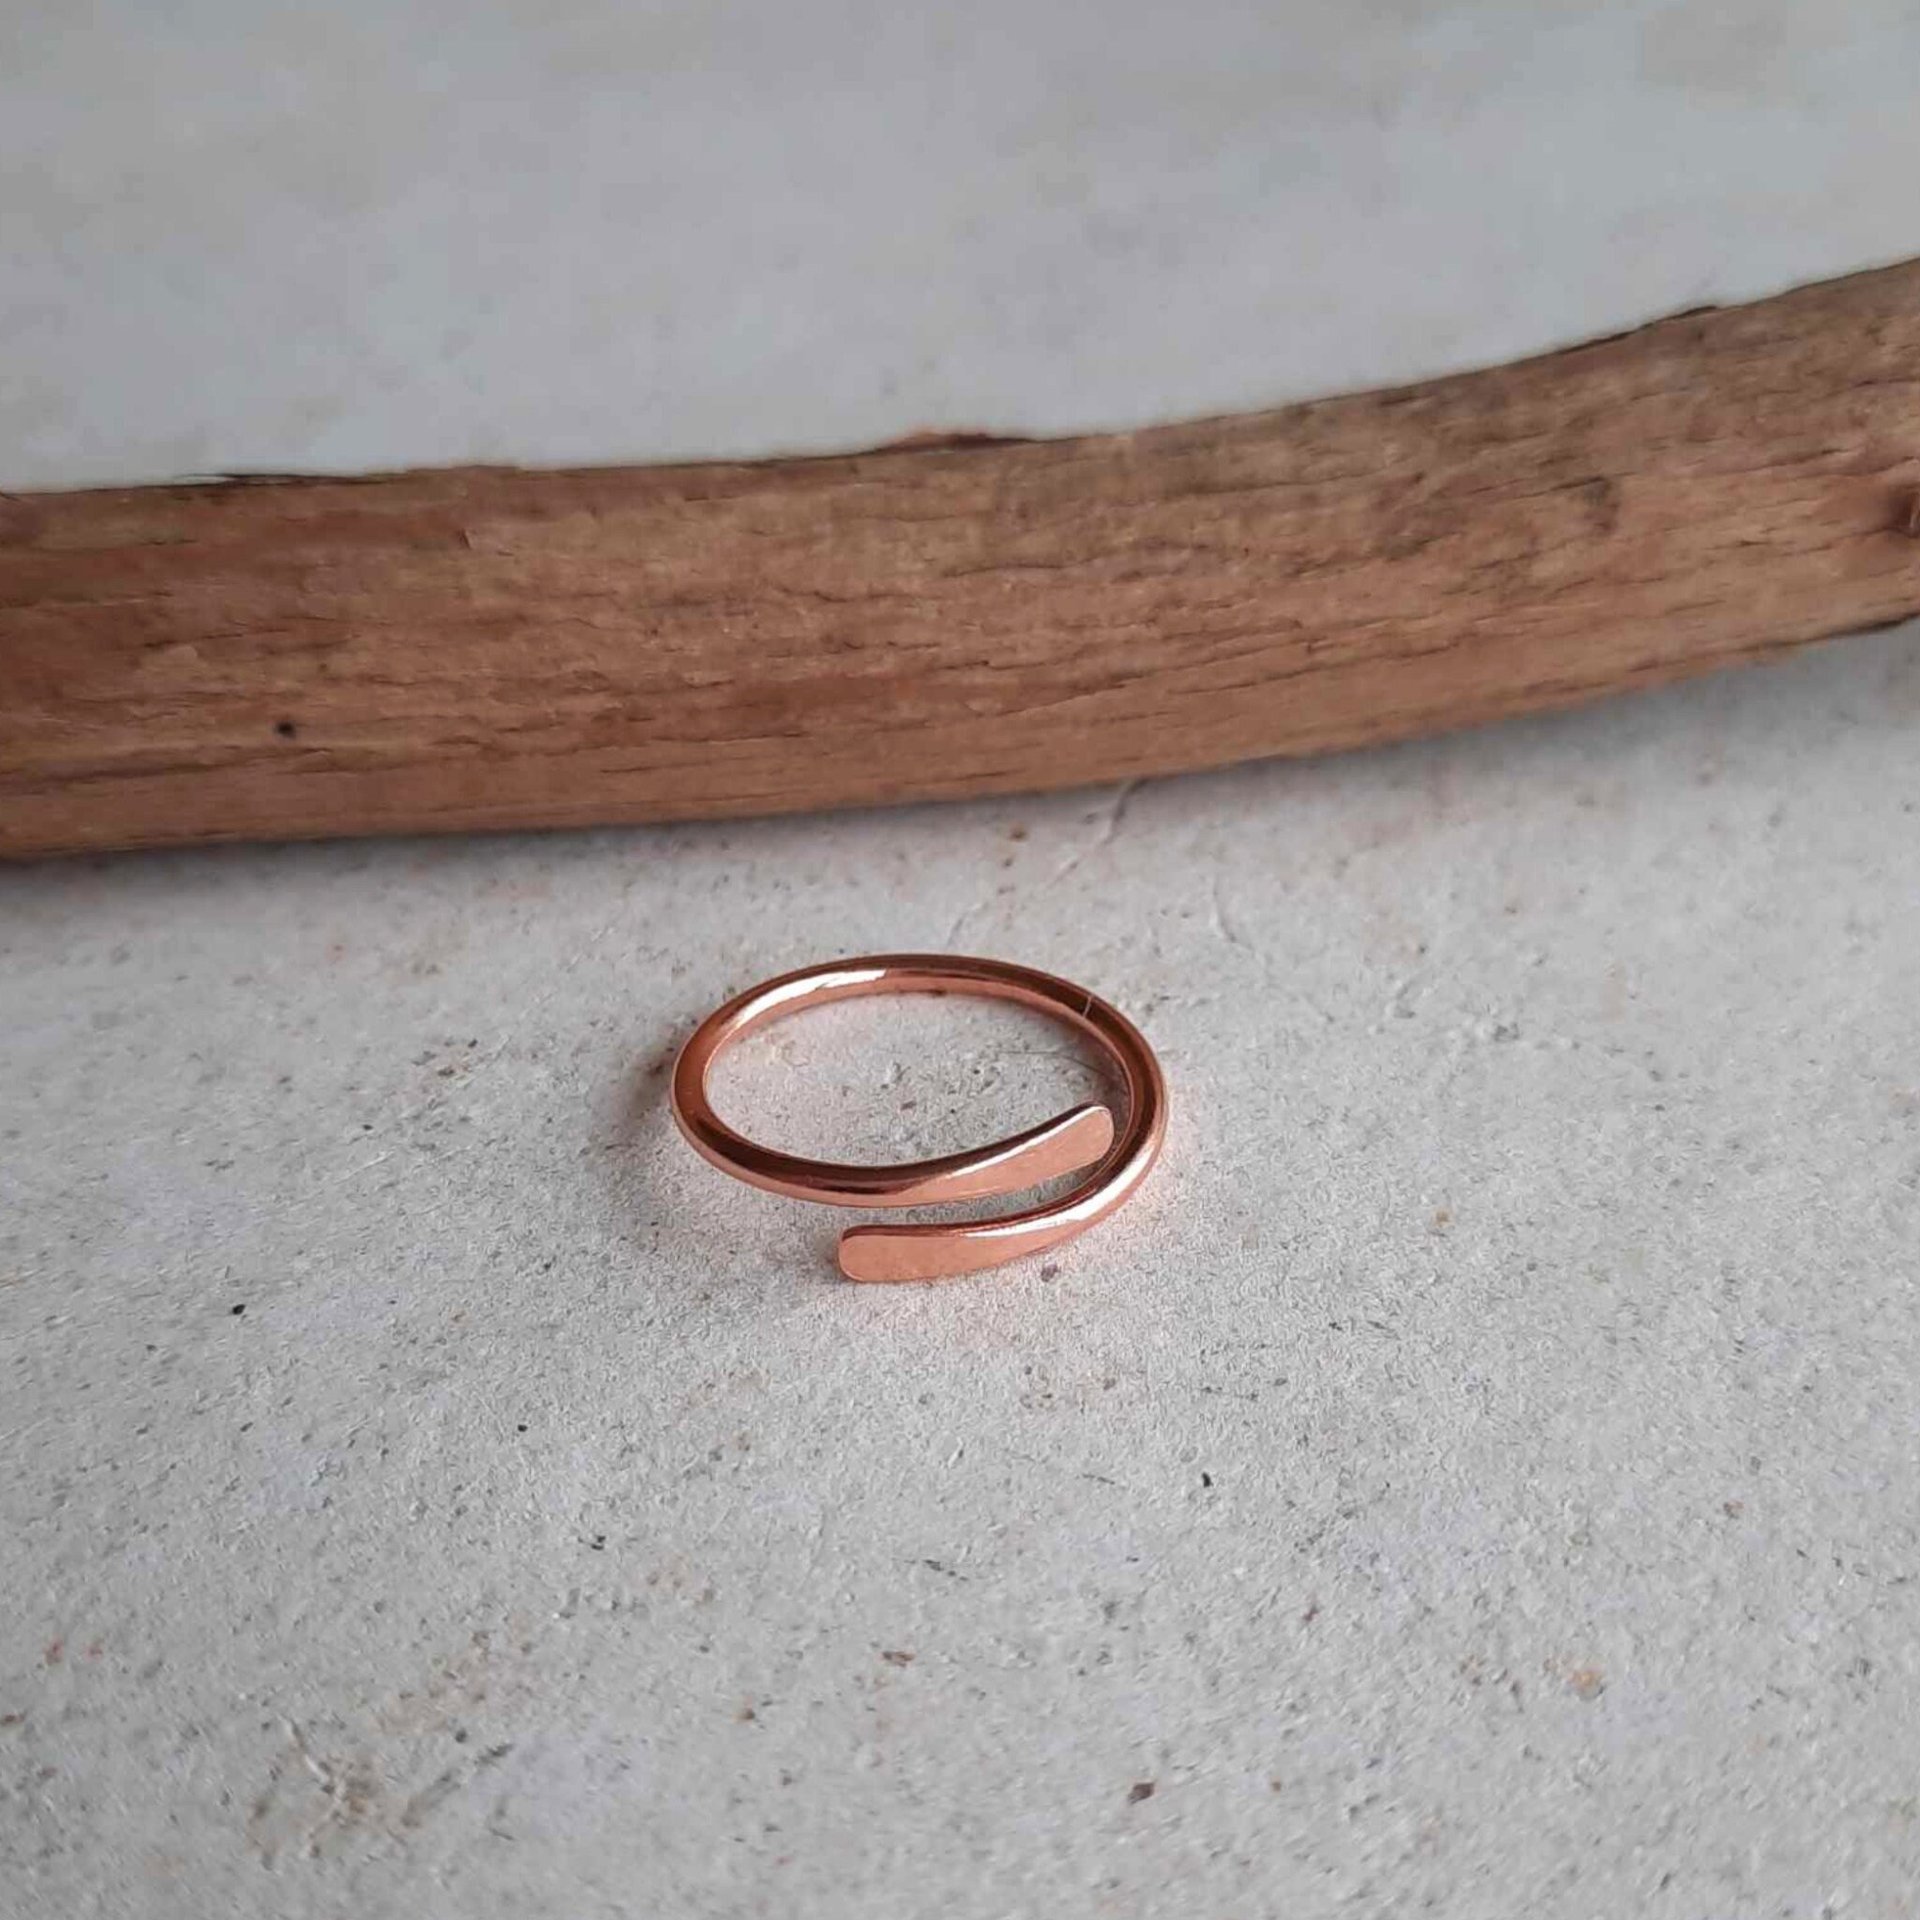 Slim copper wrap around stacking ring, artisan made by The Tiny Tree Frog Jewellery